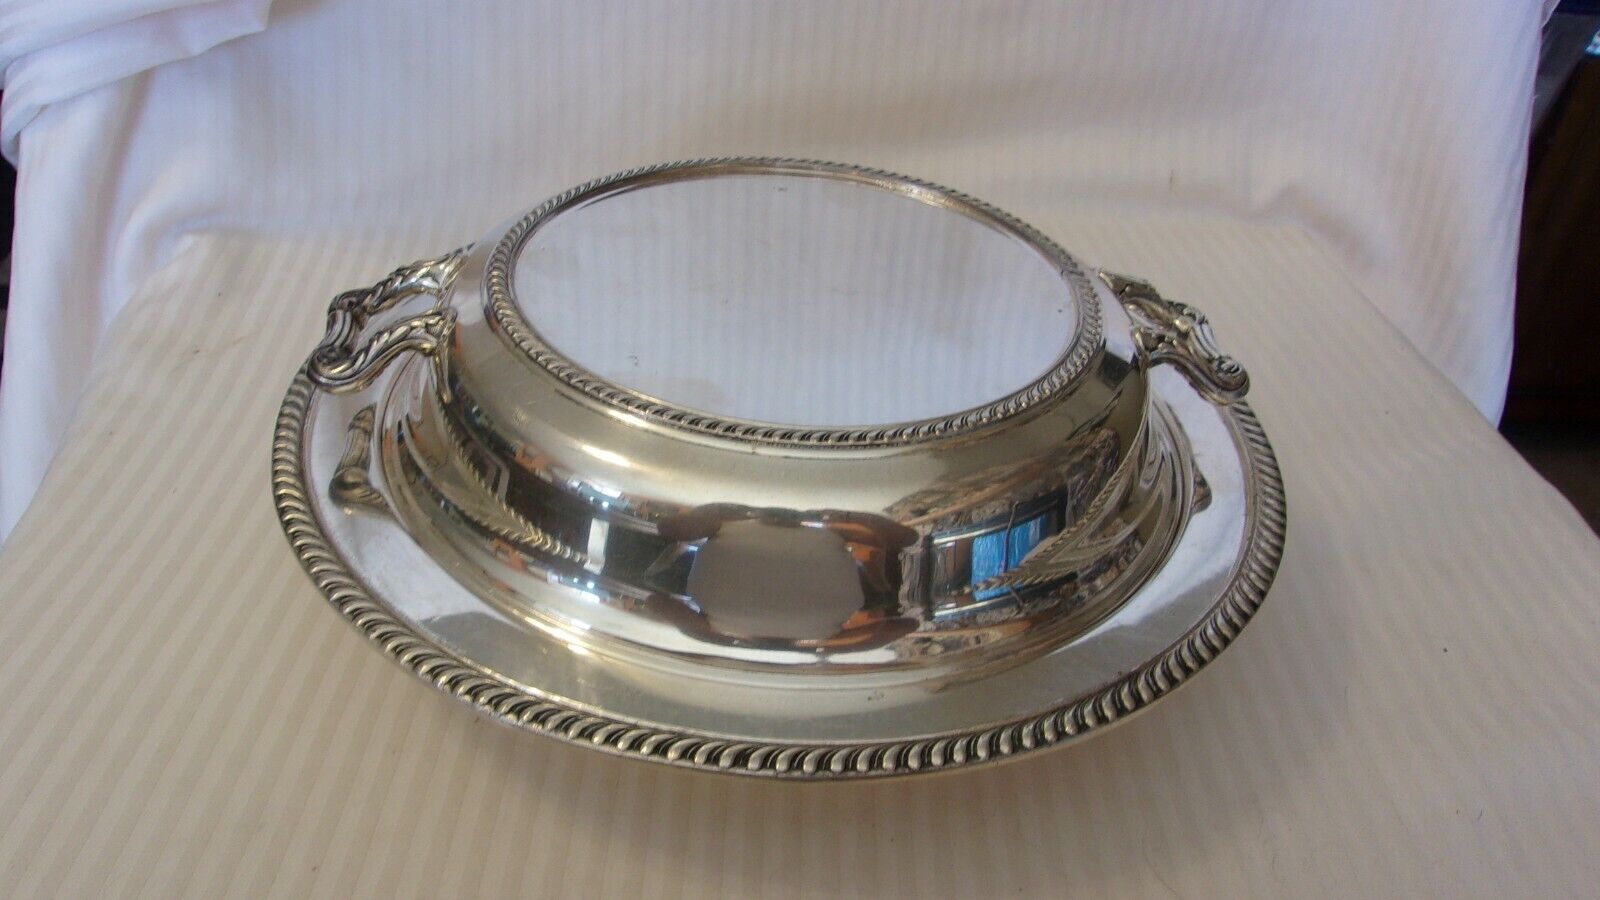 Vintage Oneida Silverplate 3 Piece Serving Bowl with Handles and Insert Fiesta 